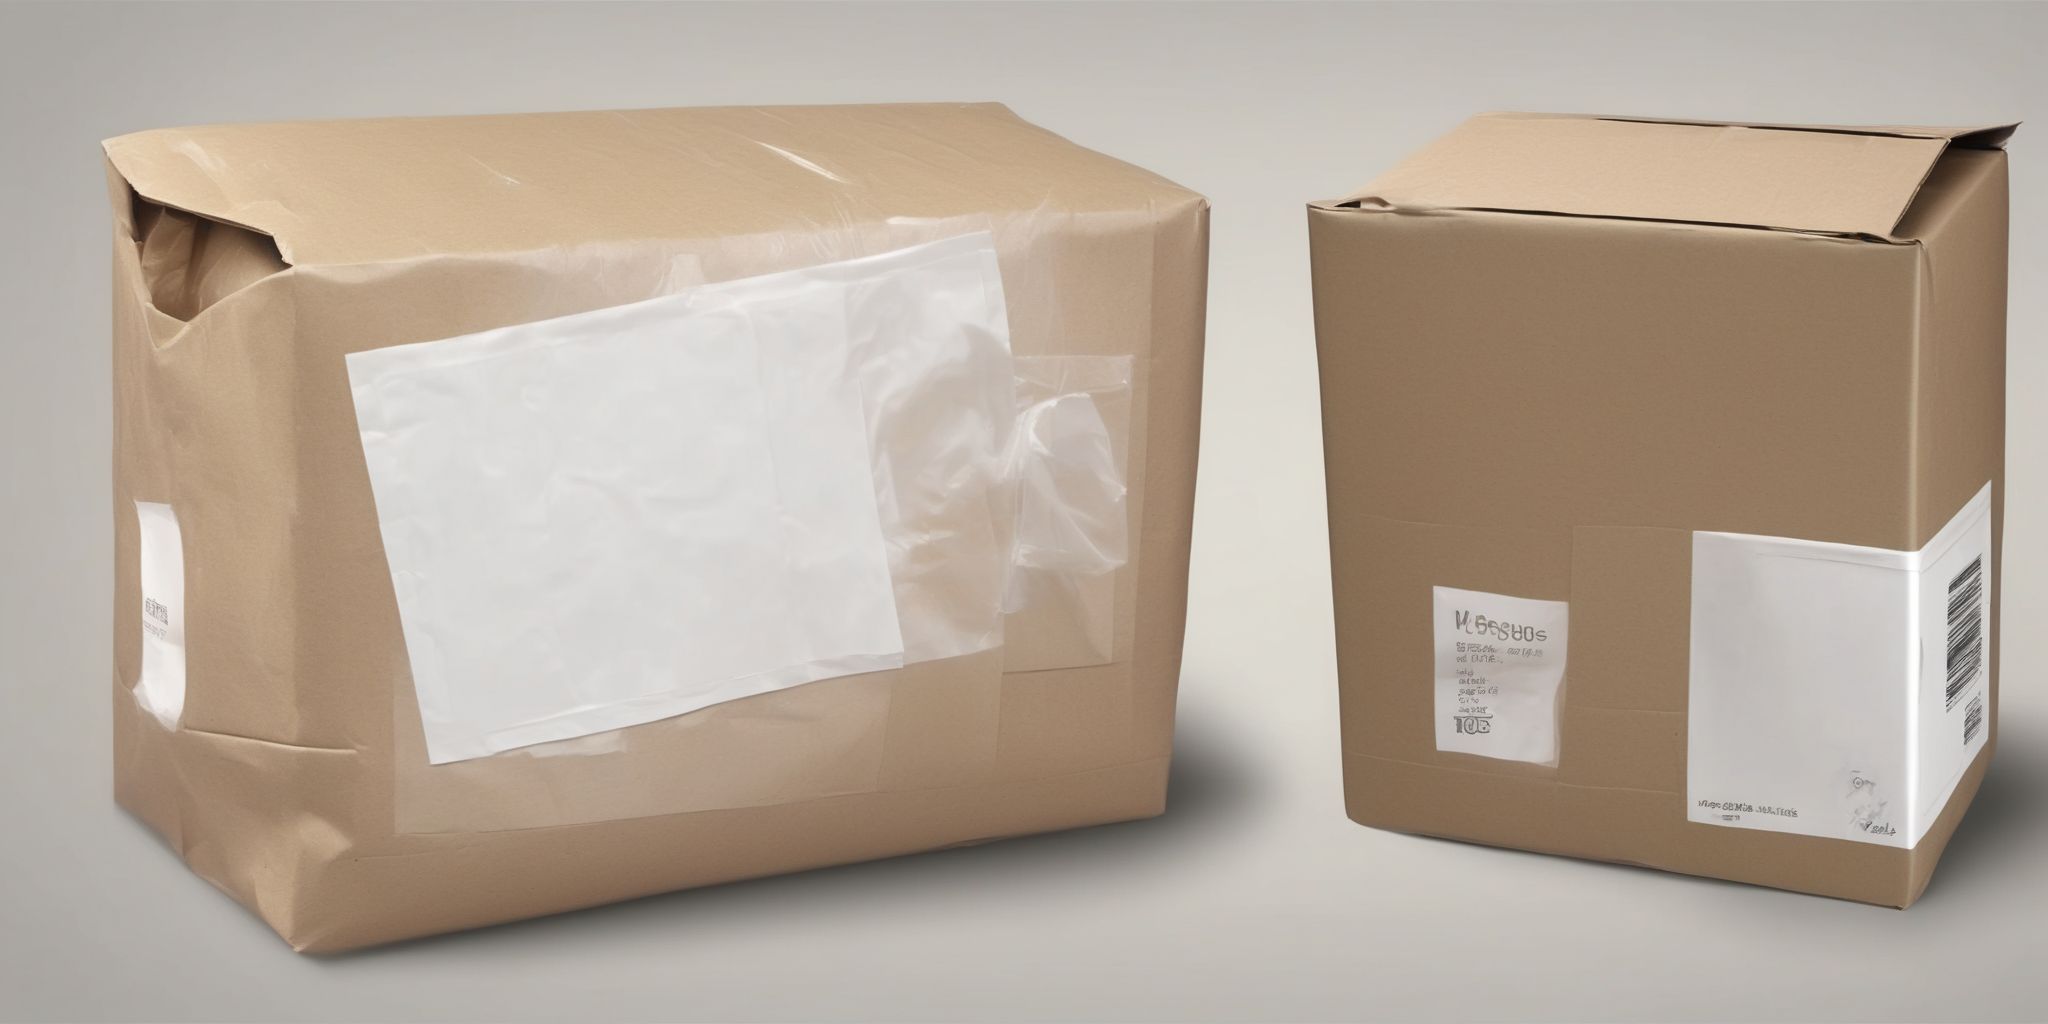 Package  in realistic, photographic style